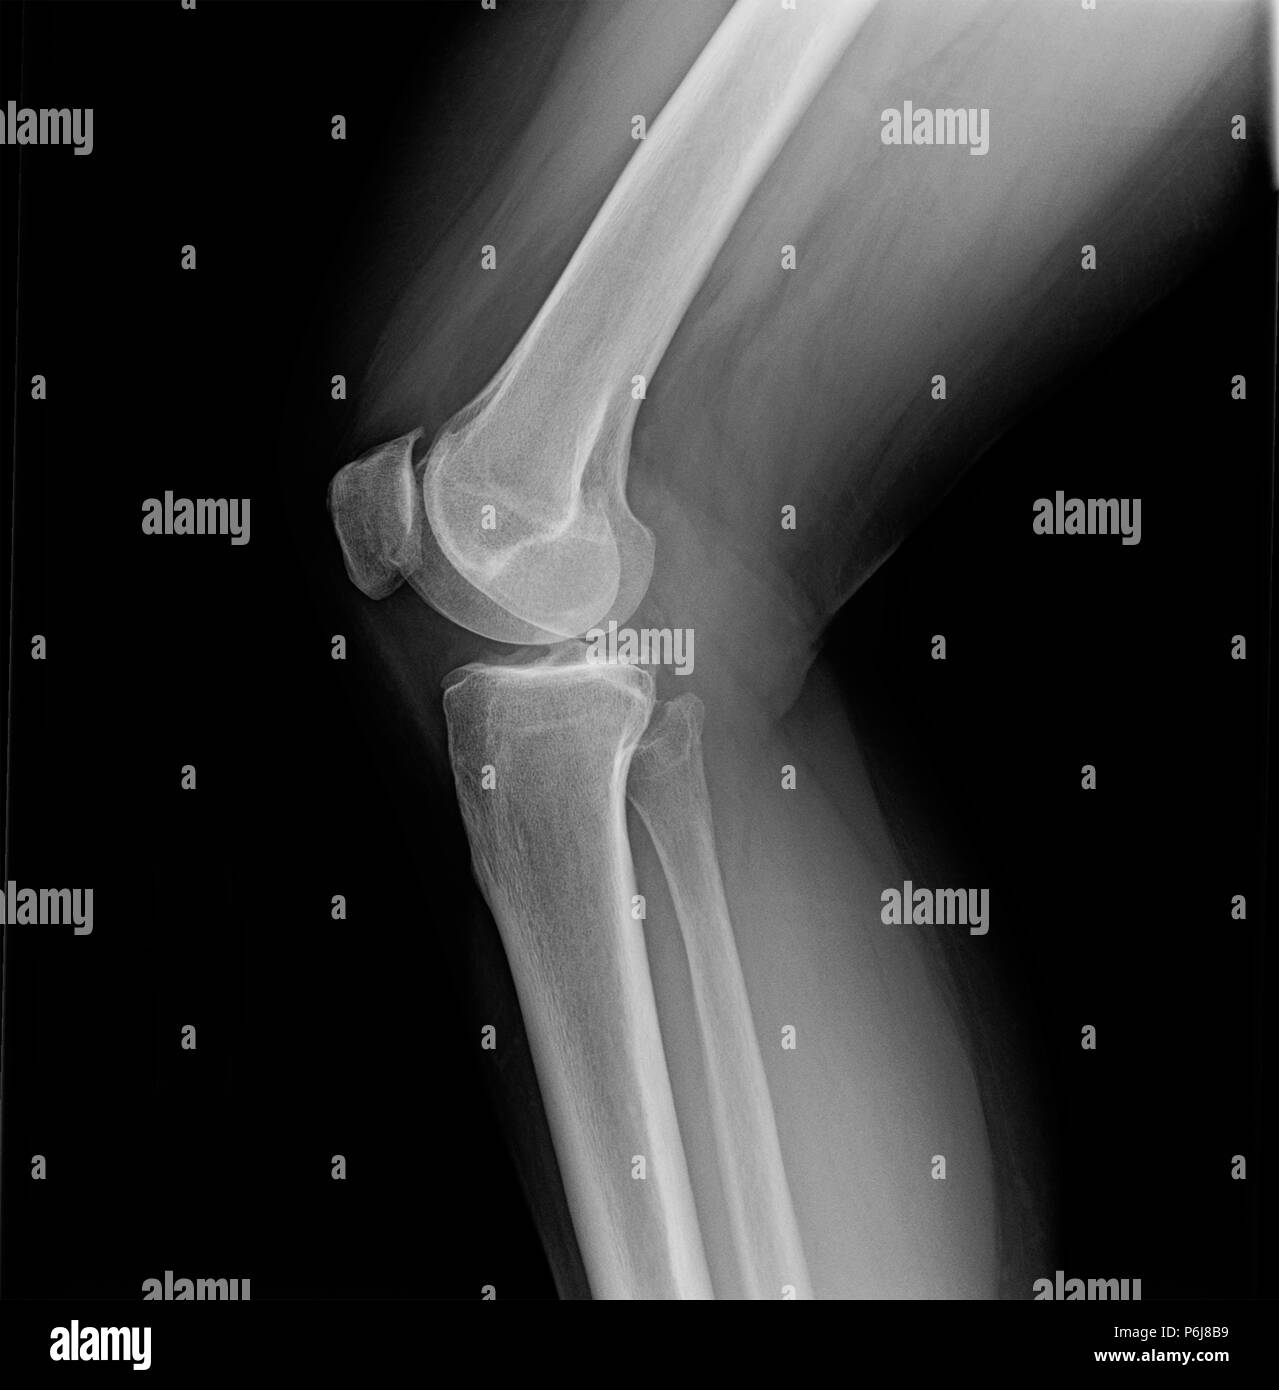 X-ray of knees of mature female suffering from minor osteoarthritis and bone spurs. Stock Photo